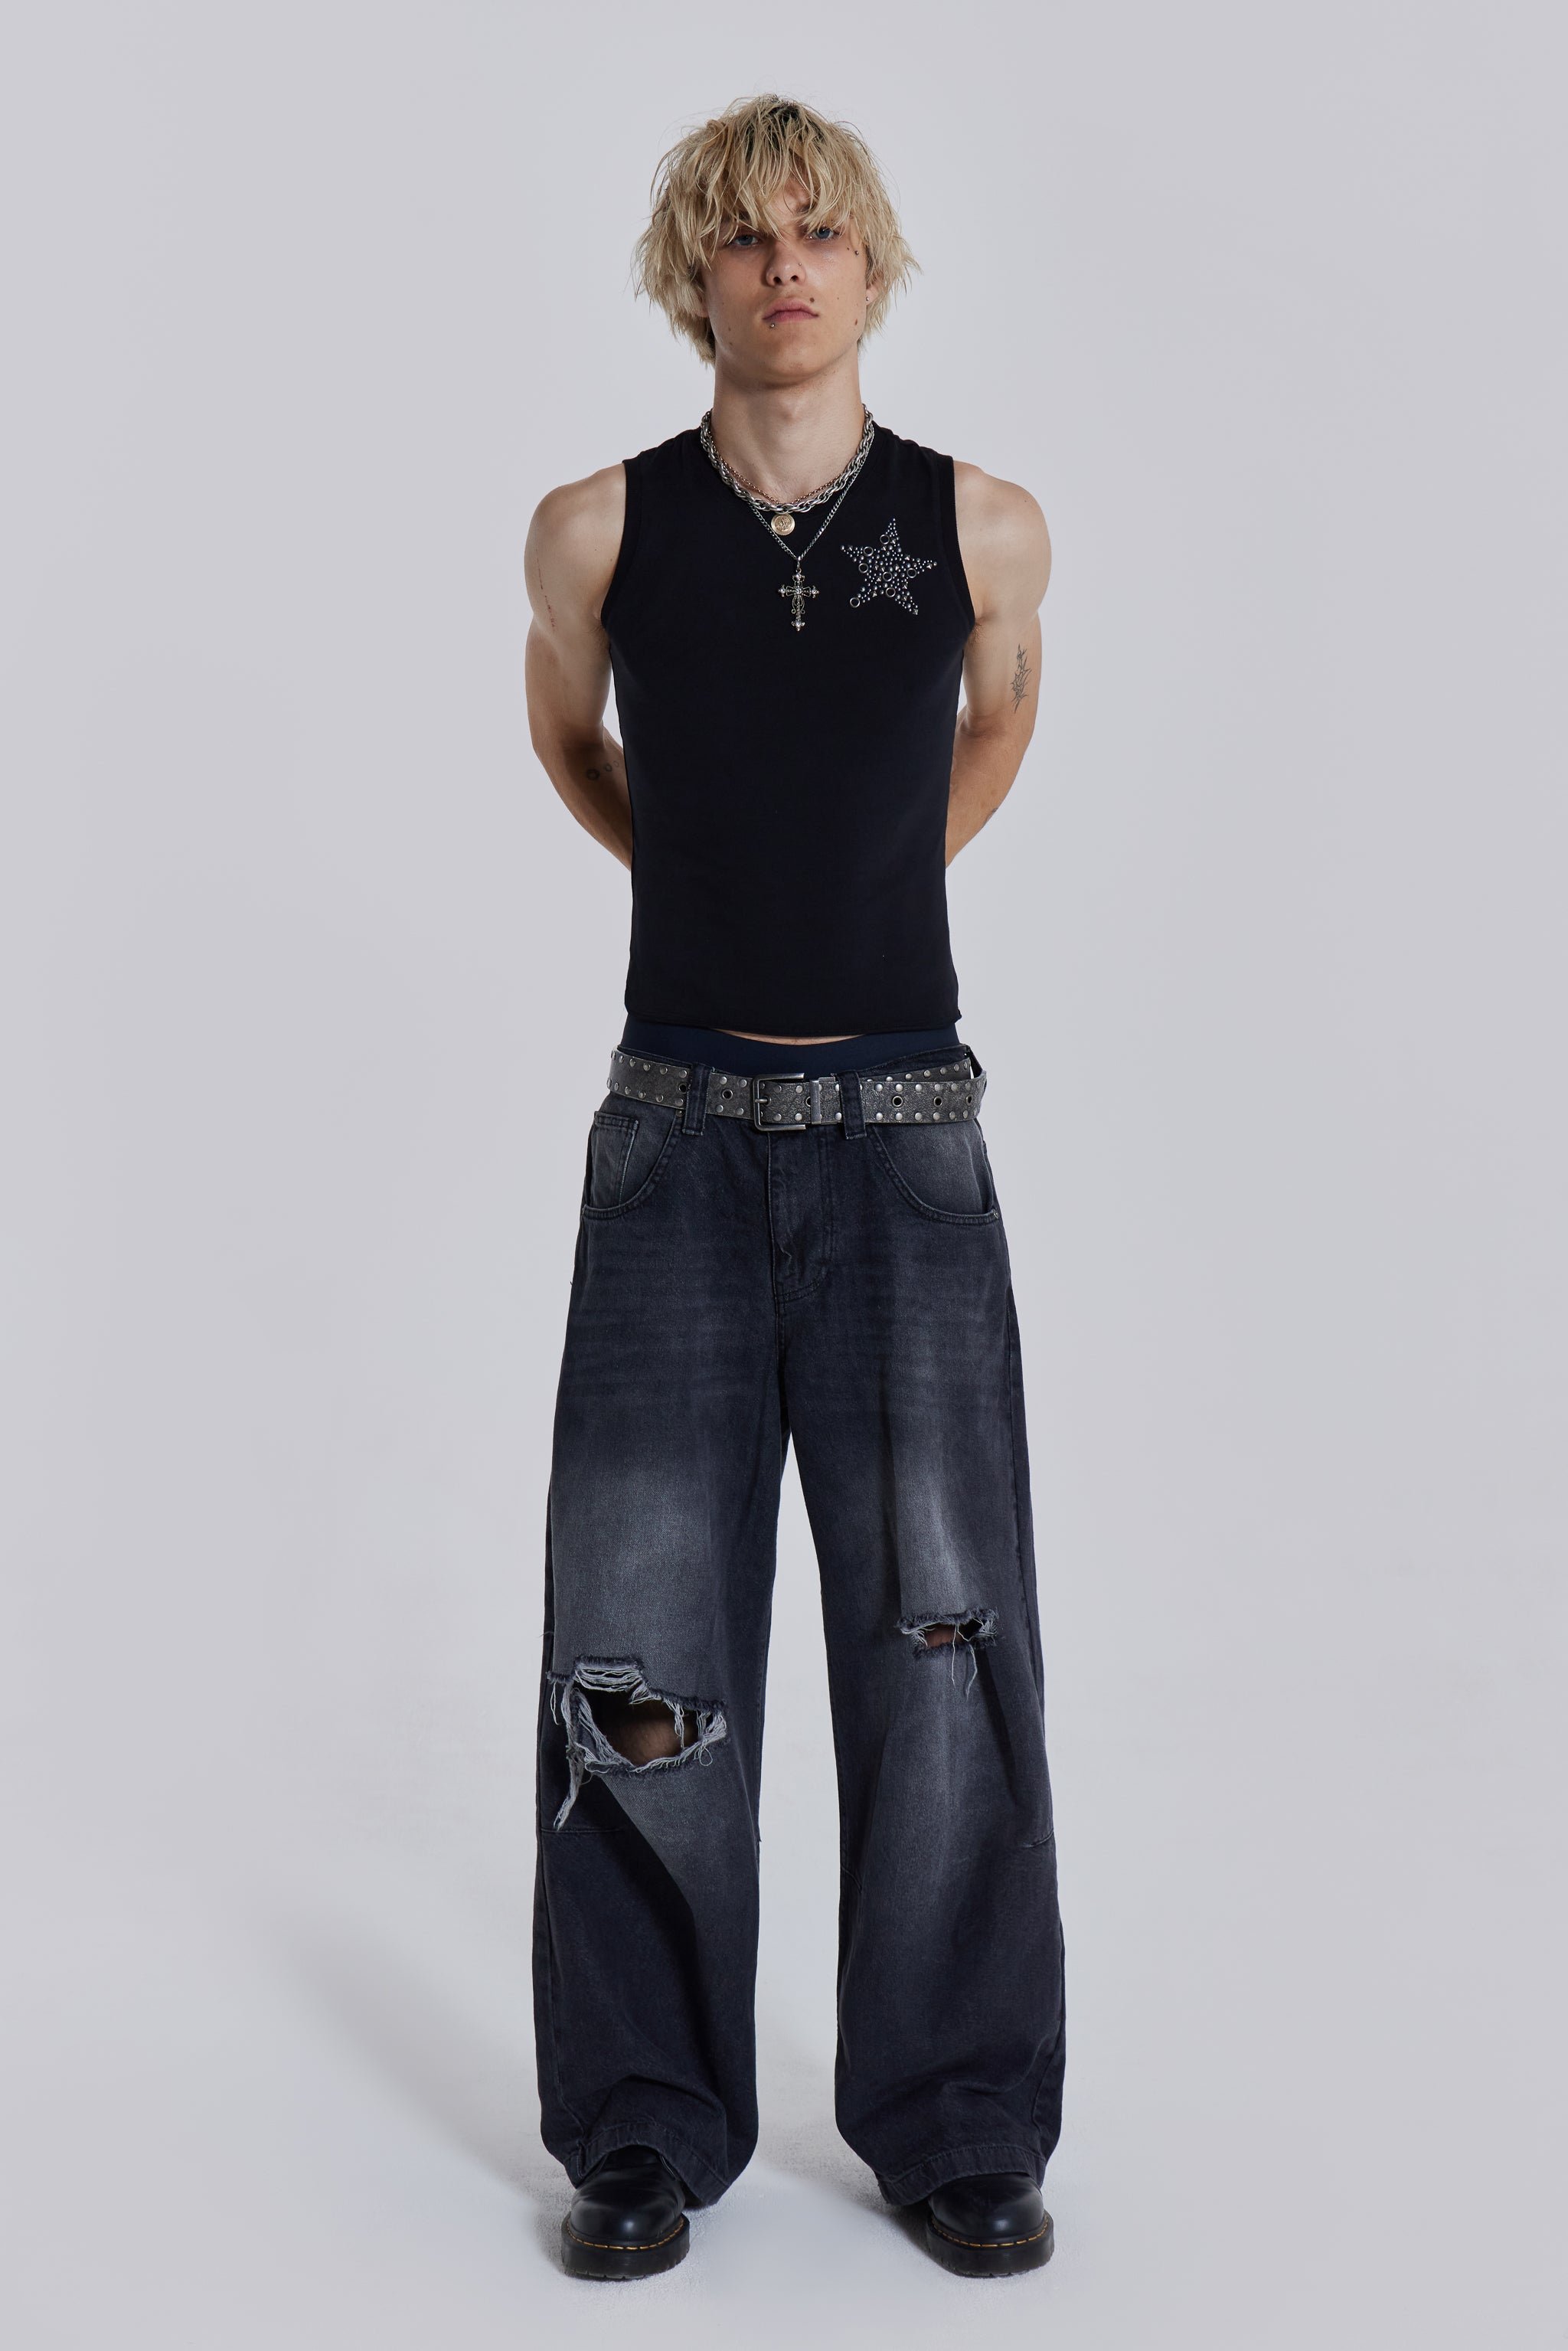 Jaded London BUSTED COLOSSUS BAGGY JEANS他の画像の追加をお願いします